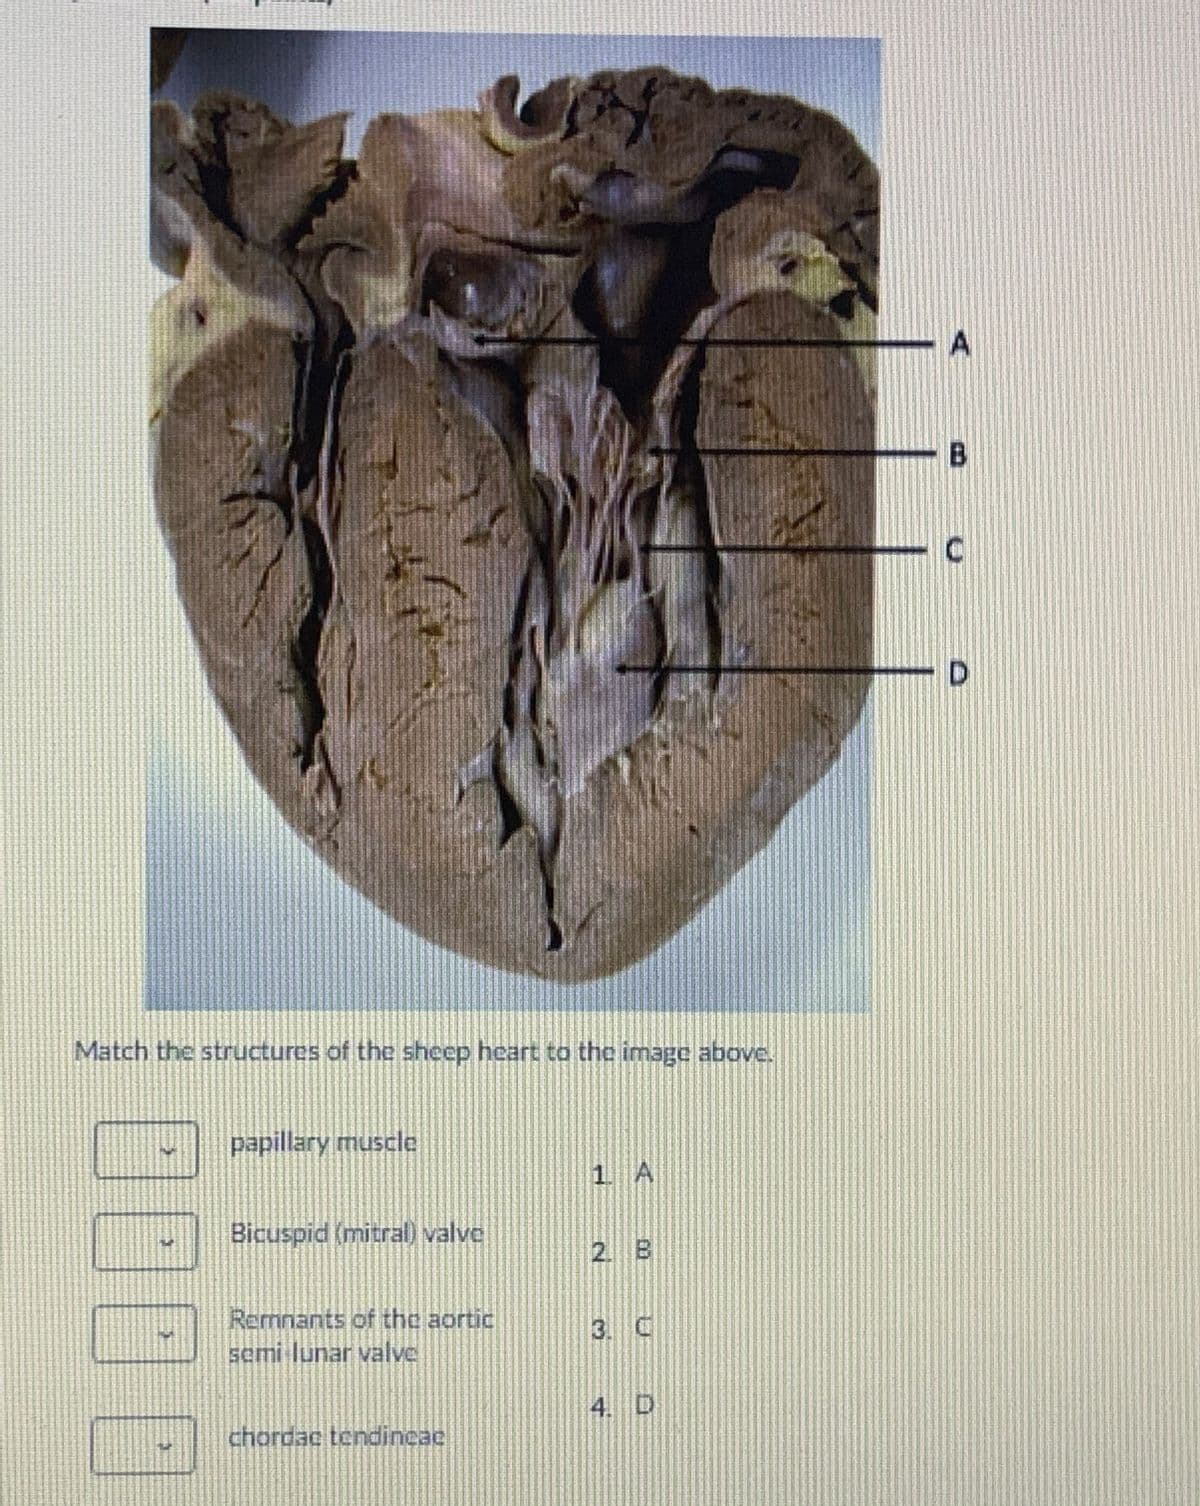 Match the structures of the sheep heart to the image above.
papillary muscle
1 A
Bicuspid (mitral) valve
2. B
Remnants of the aortic
semi lunar valve
3. C
4. D
chordac tendincac
B.
